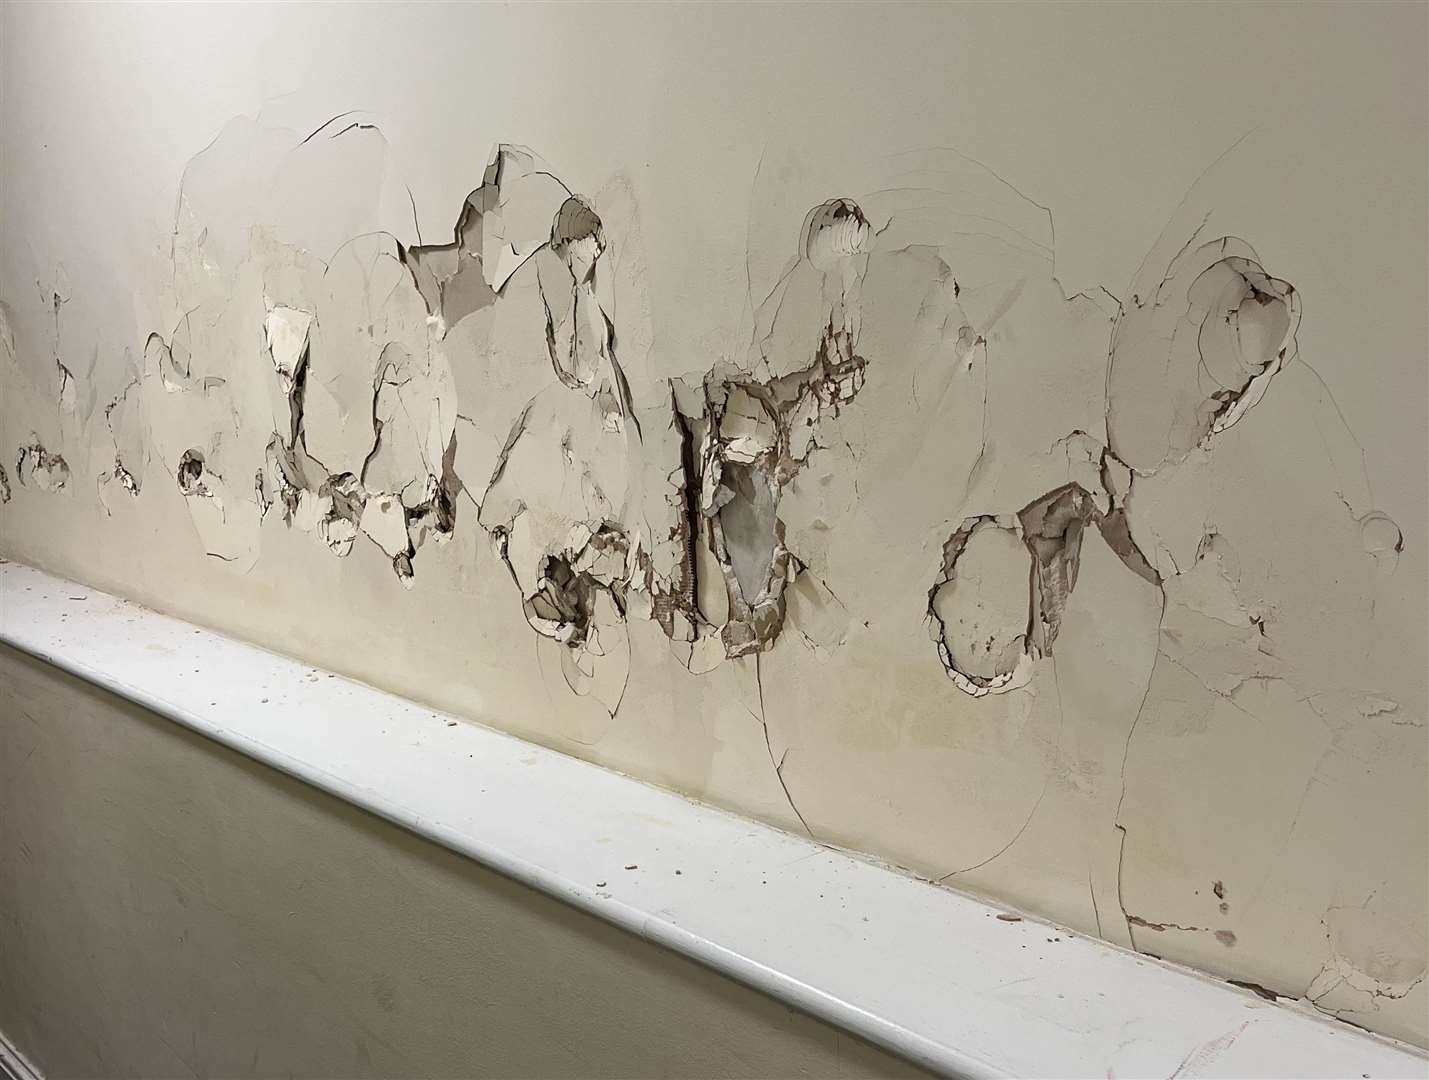 The wall at the entry of the Metropole flats in Dover has been badly damaged by vandals. Picture: Steve Davies